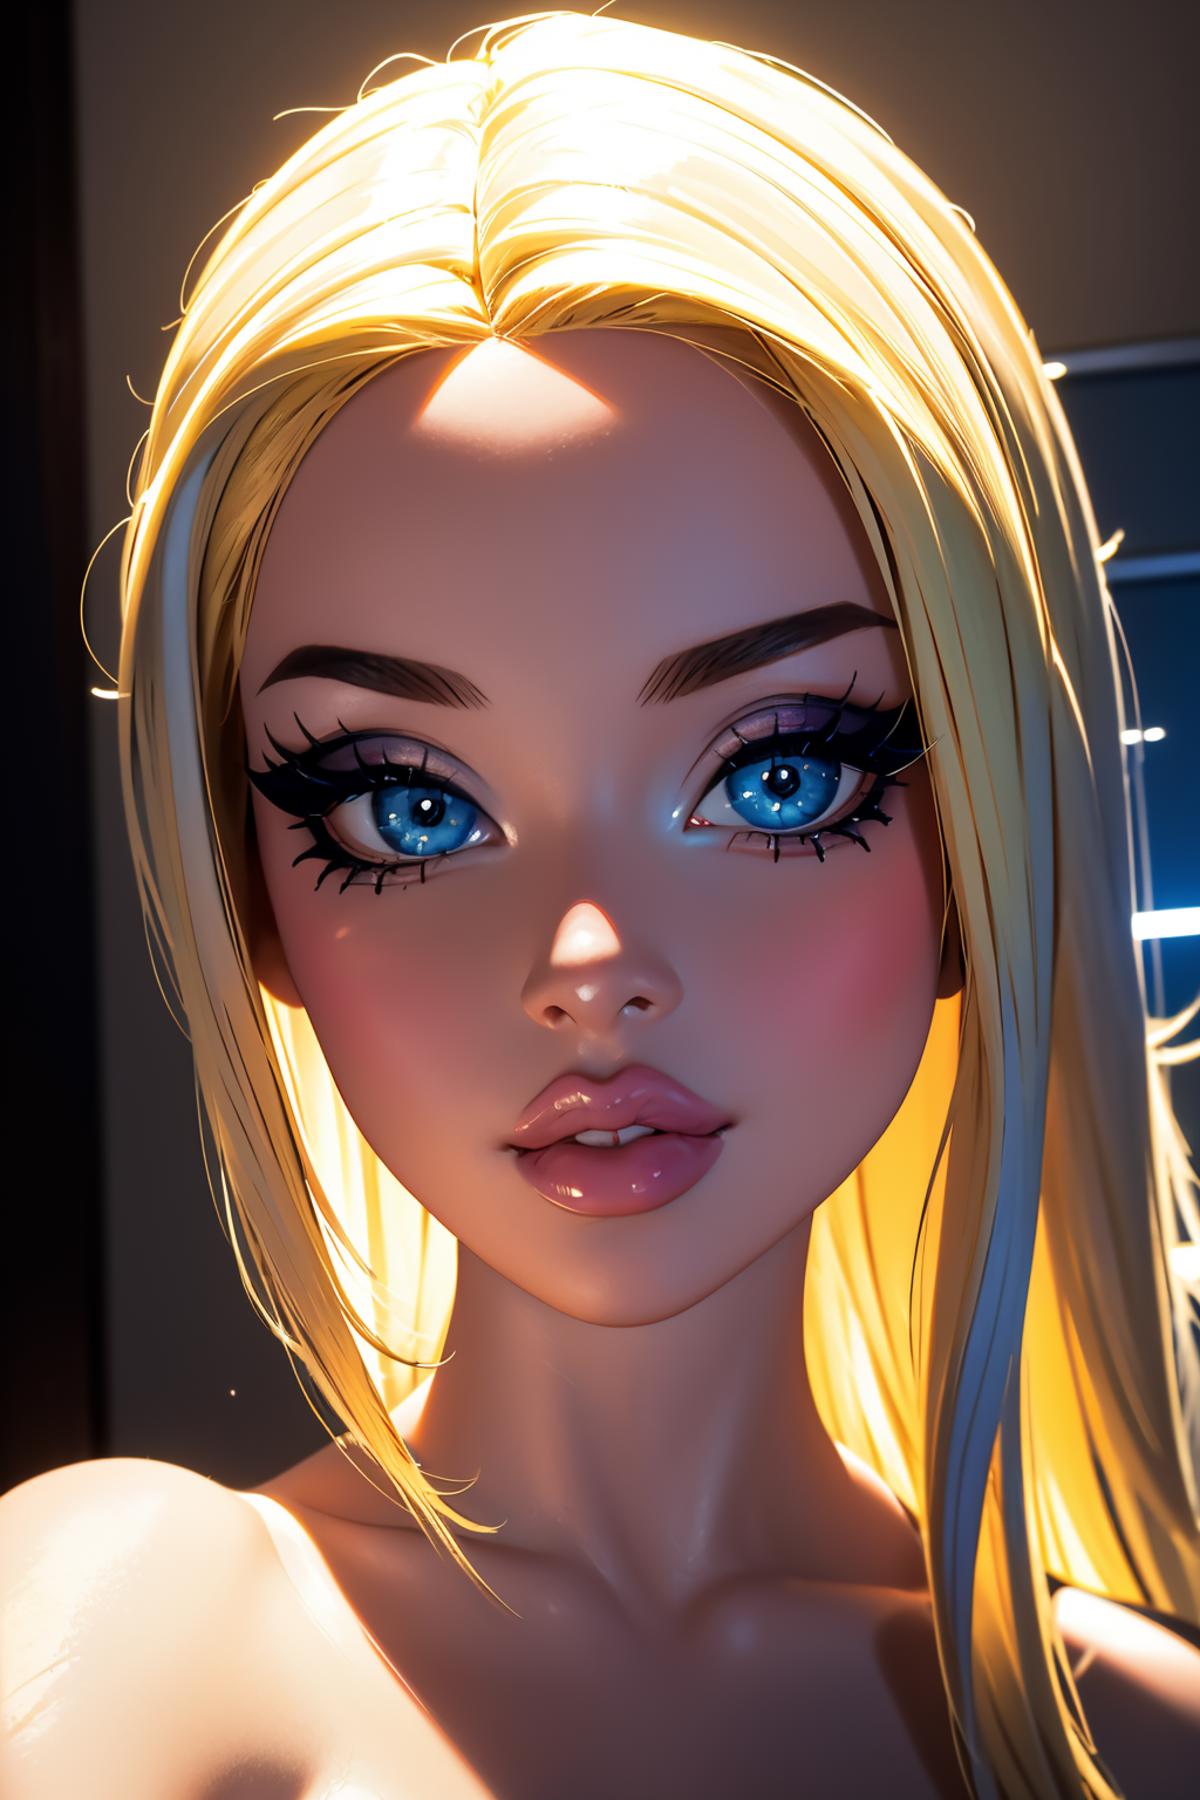 E-Girl Makeup image by RubberDuckie